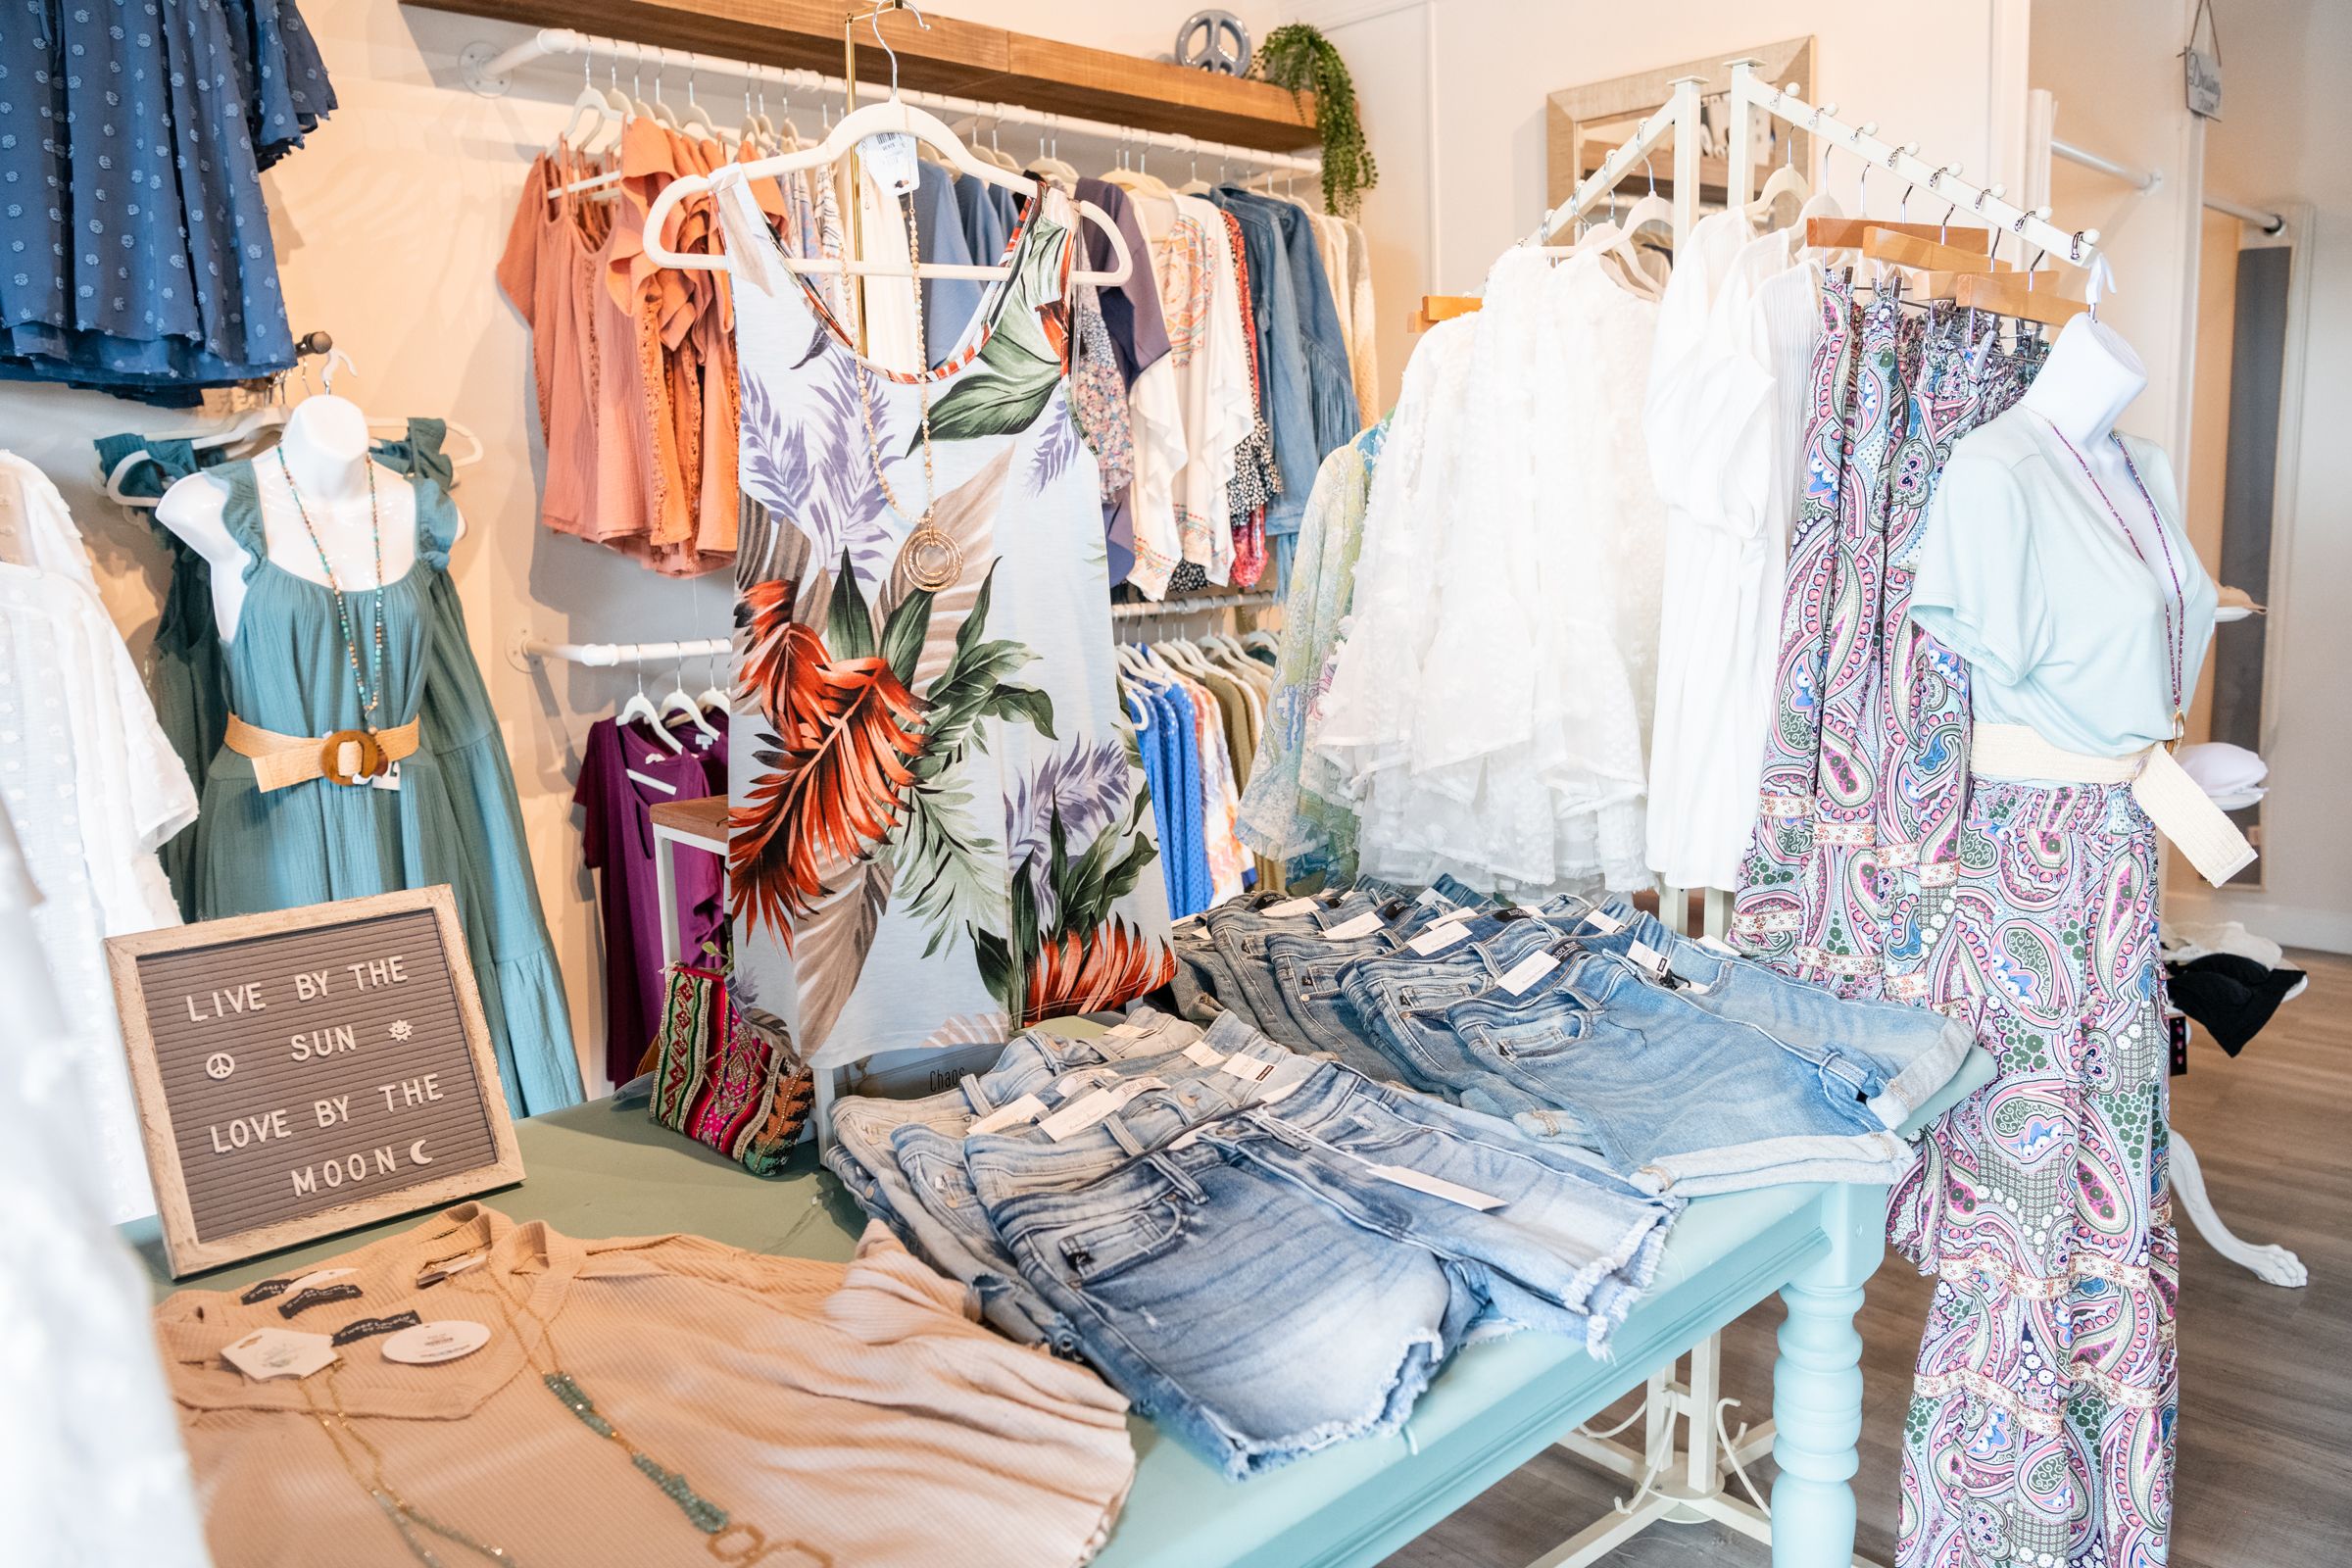 Blue Hydrangea, a women's clothing boutique in High Point, NC.